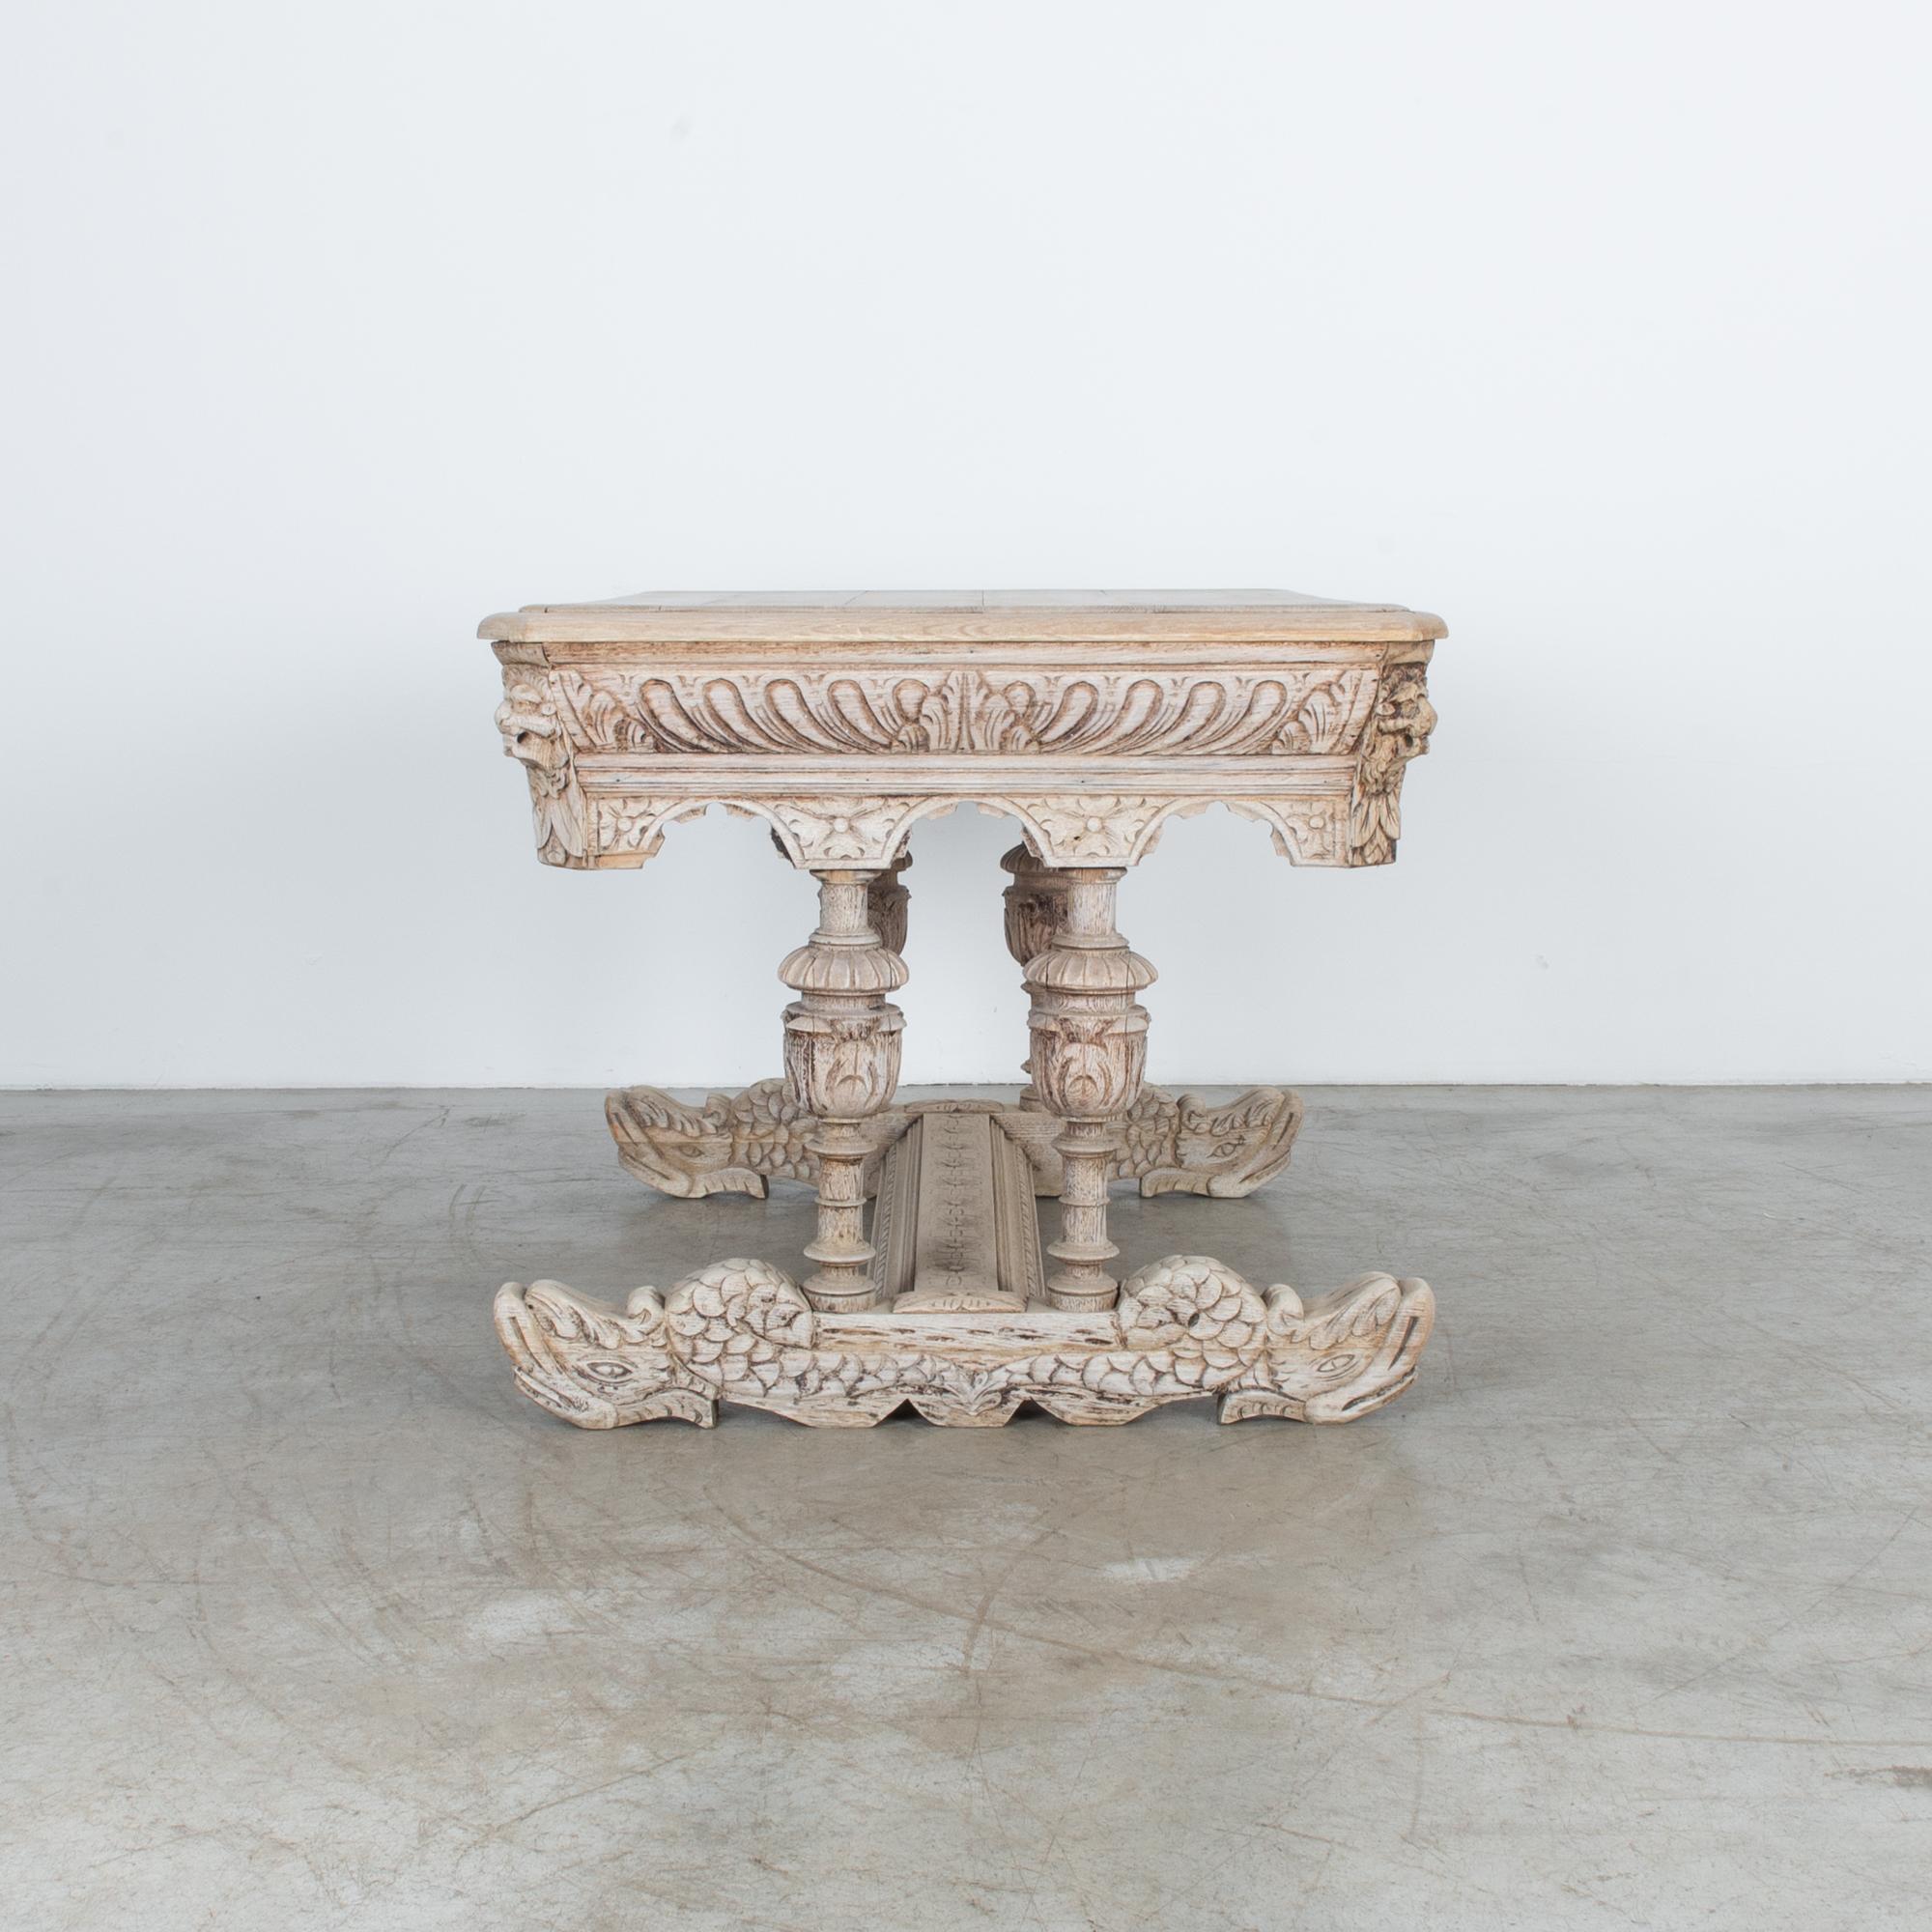 Impressive carved legs and base on this beautiful table. With a unique Rococo influence, this Flemish style table expands the classical dolphin motif. The elaborately carved base depicts two dolphin figures. Ornate carved legs and thick apron